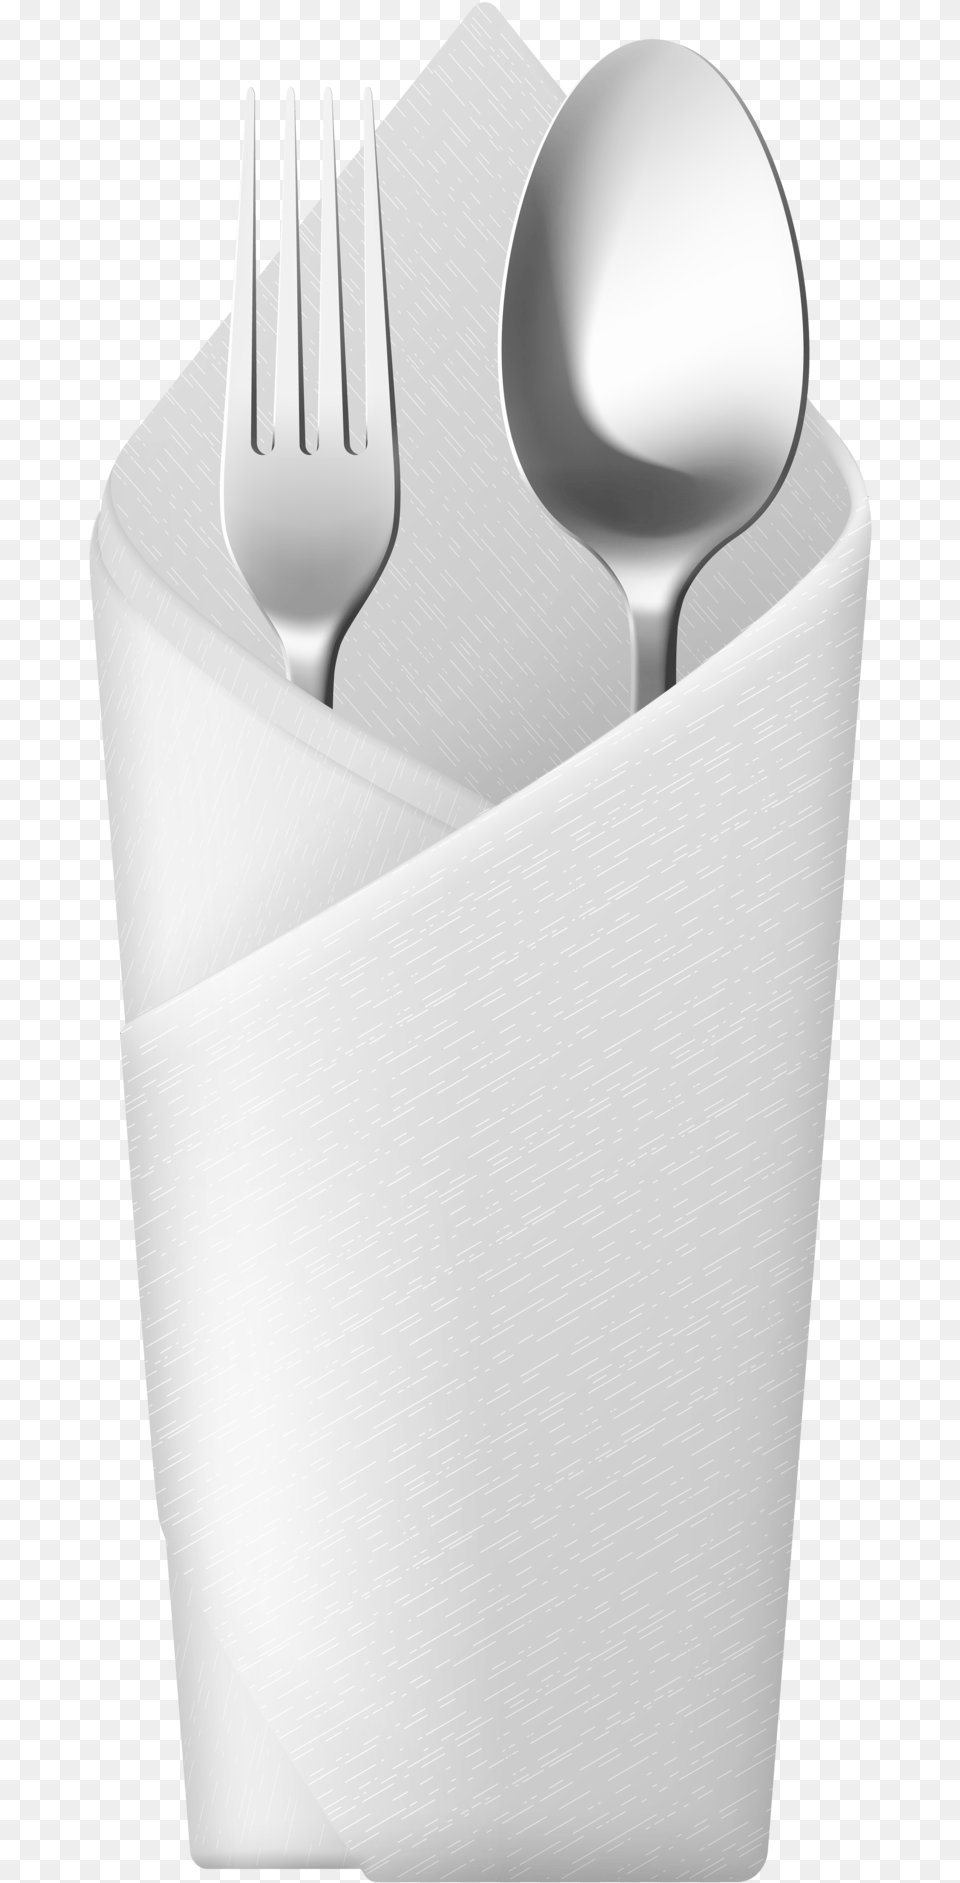 Spoon And Fork In Napkin Mobile Phone, Cutlery Free Png